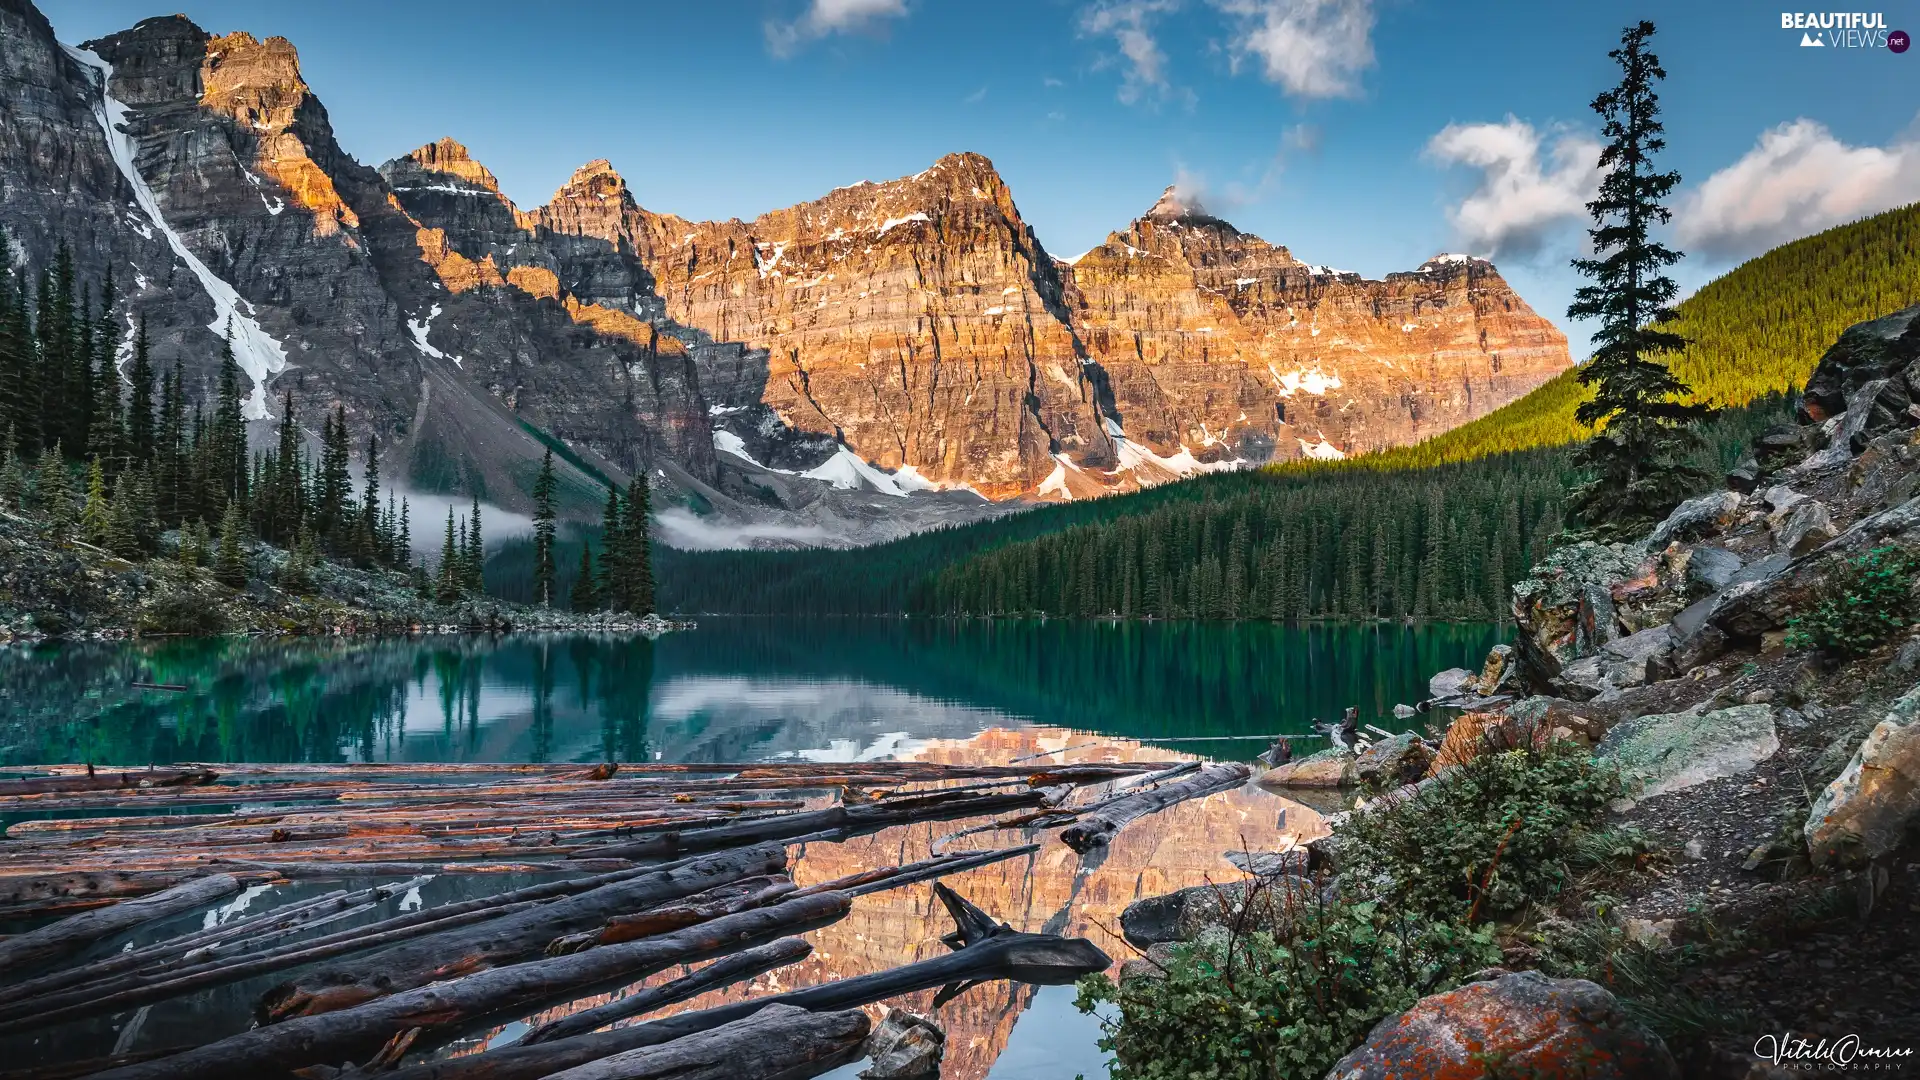 viewes, Moraine Lake, Mountains, Alberta, forest, lake, Logs, Canada, Banff National Park, trees